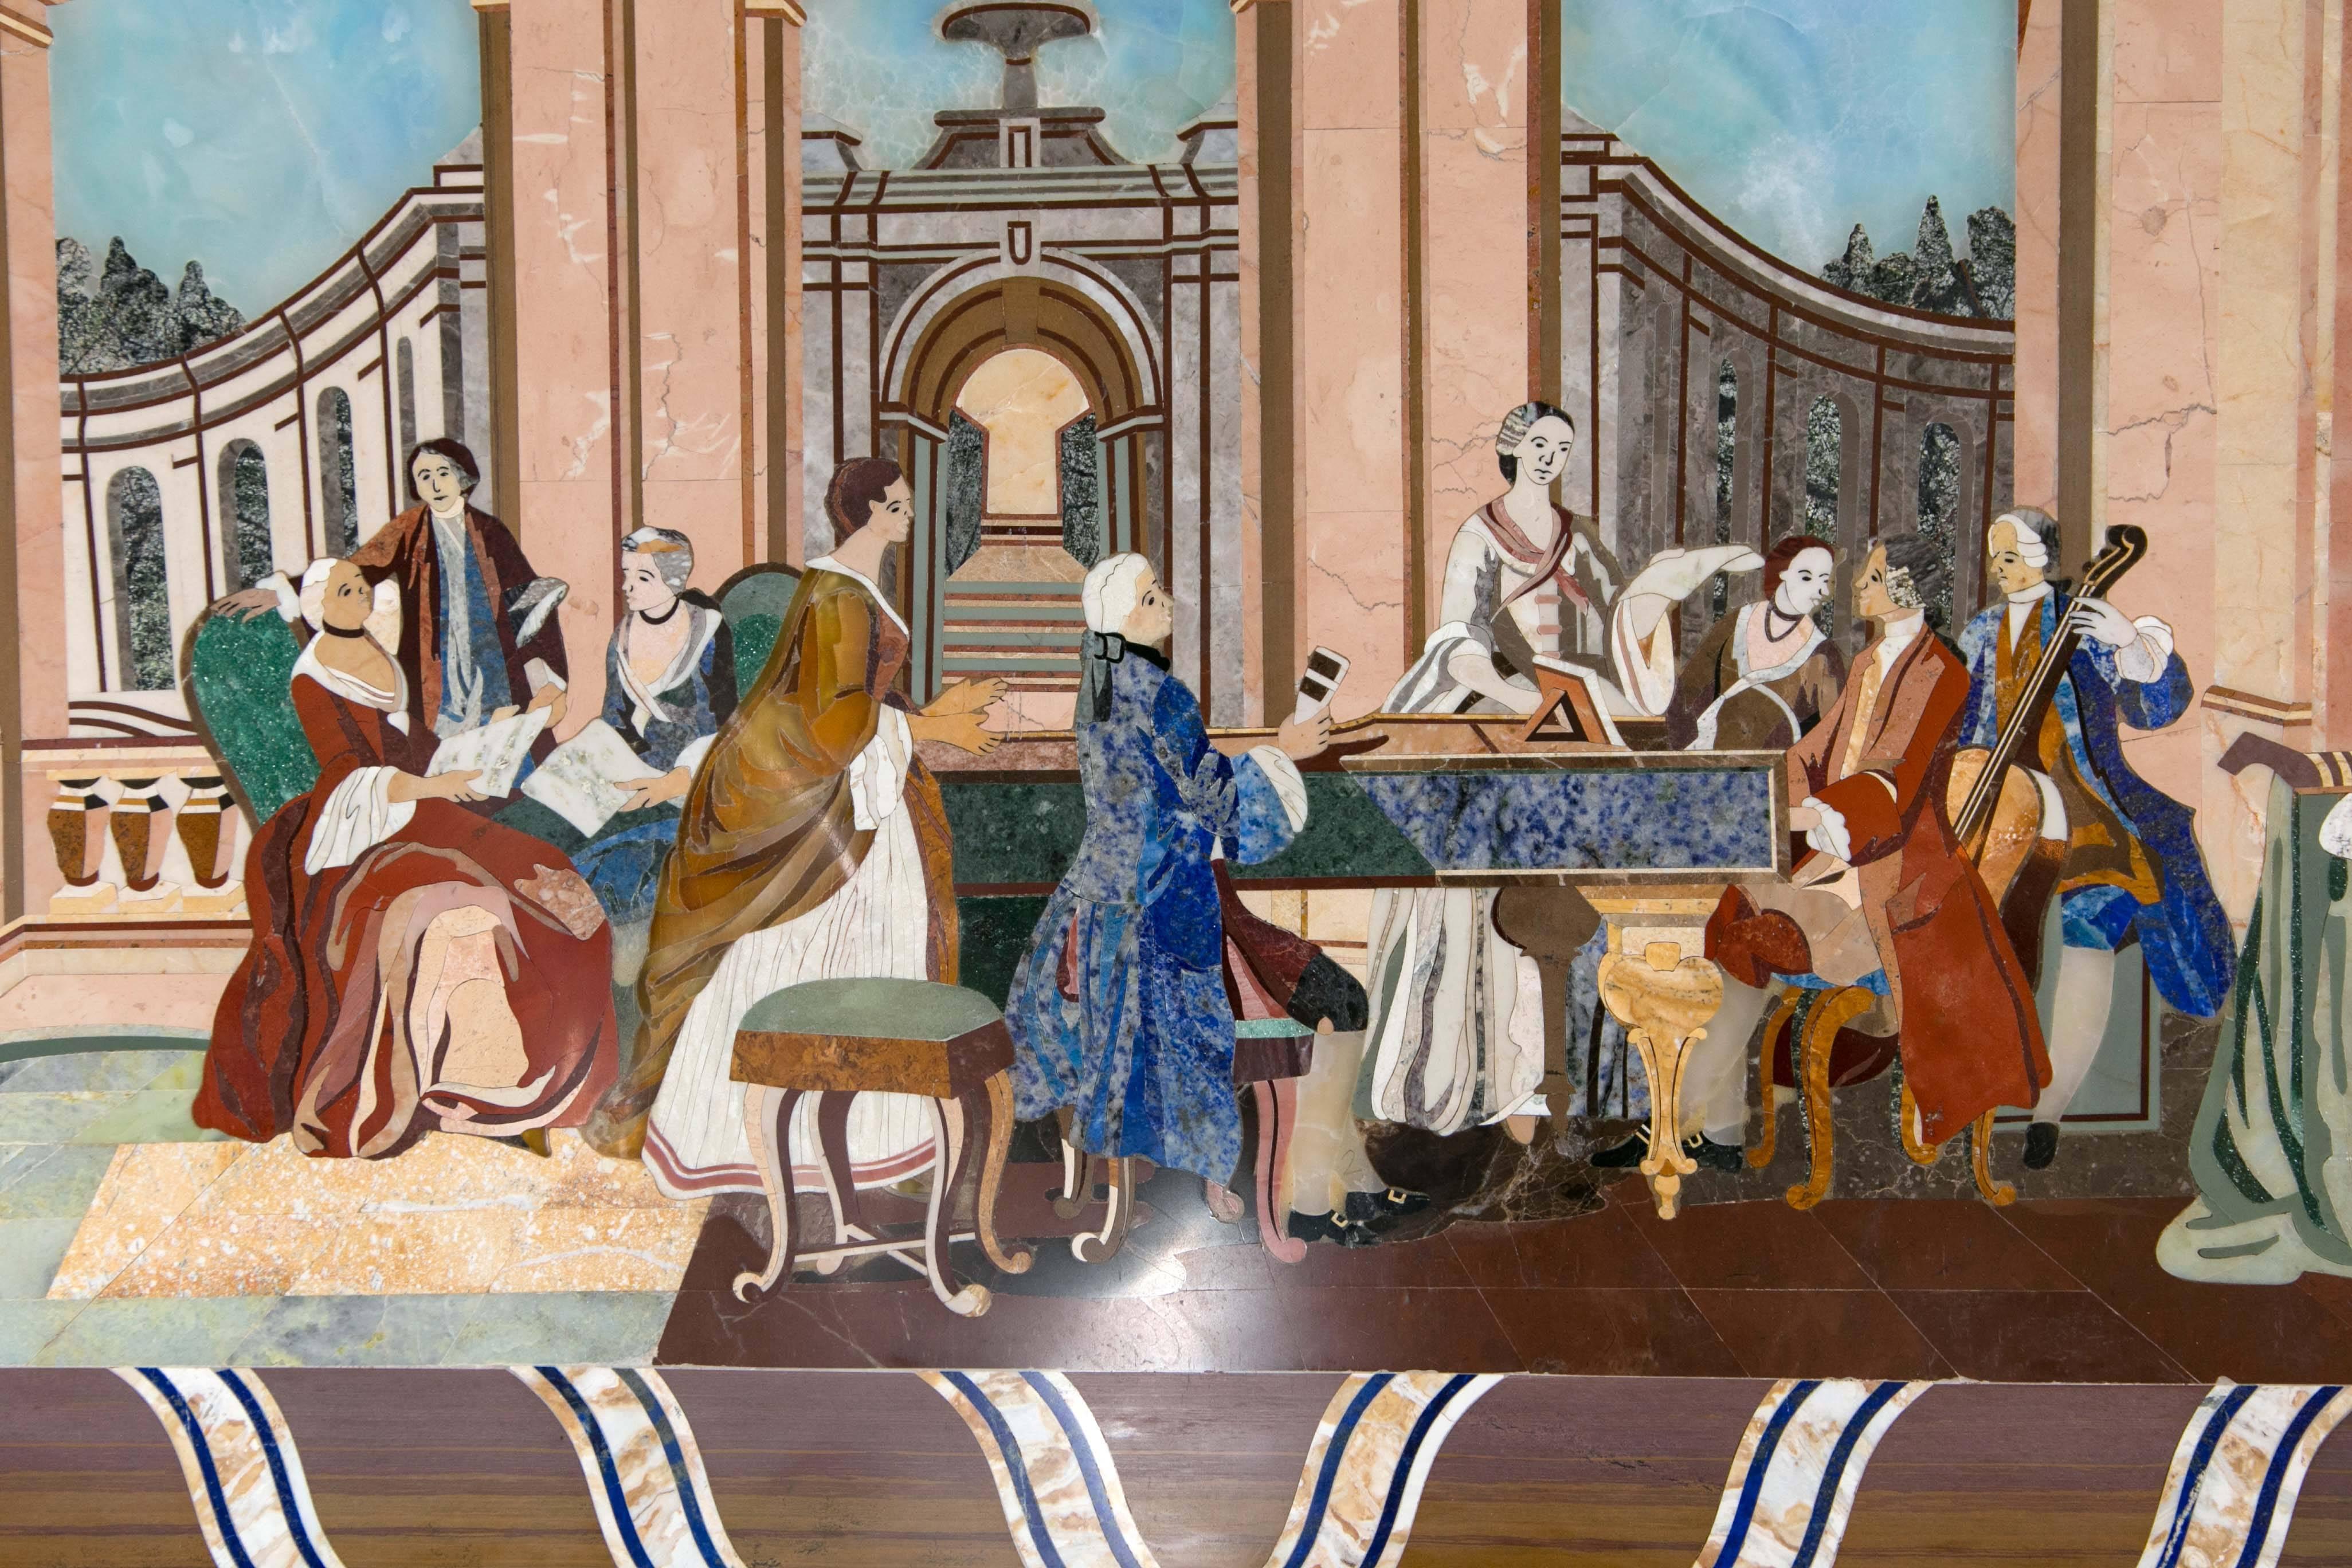 This interesting hand worked Pietra Dura scene of a recital is self framed. A gentleman plays piano while a lady holds a sheet of music or lyrics, a bassist plays to the side while others watch or appear uninterested on the left side. The all wear